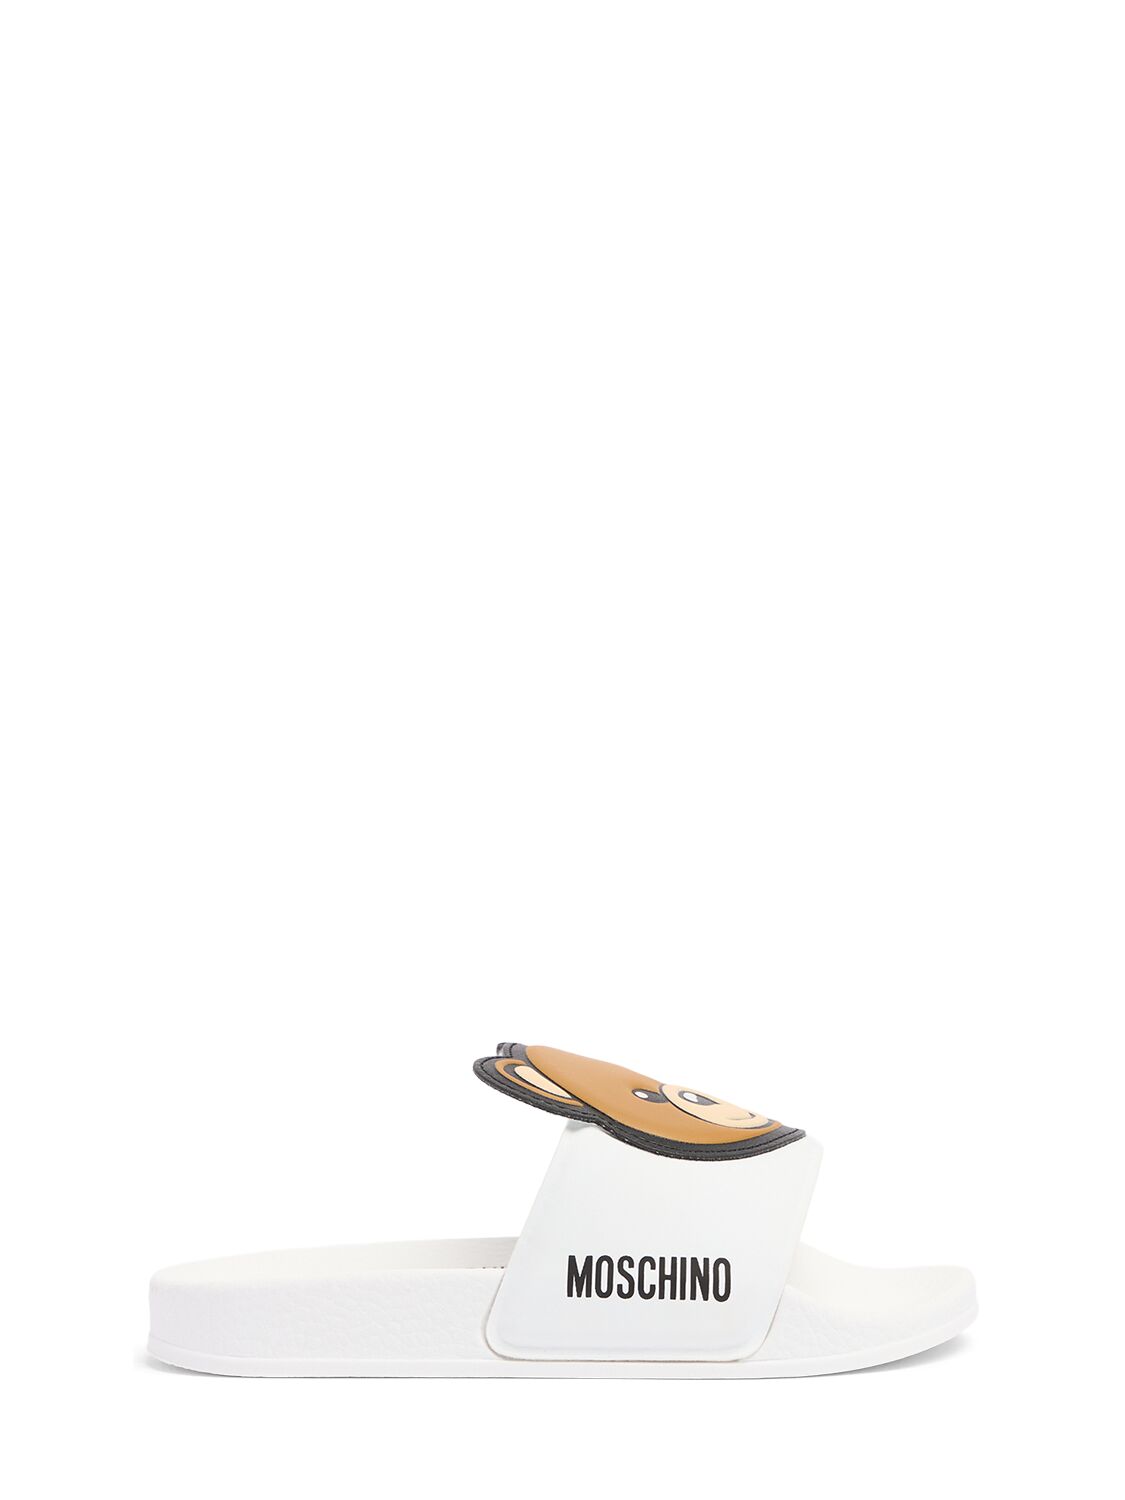 Moschino Kids' Logo Print Rubber Slide Sandals W/ Patch In White